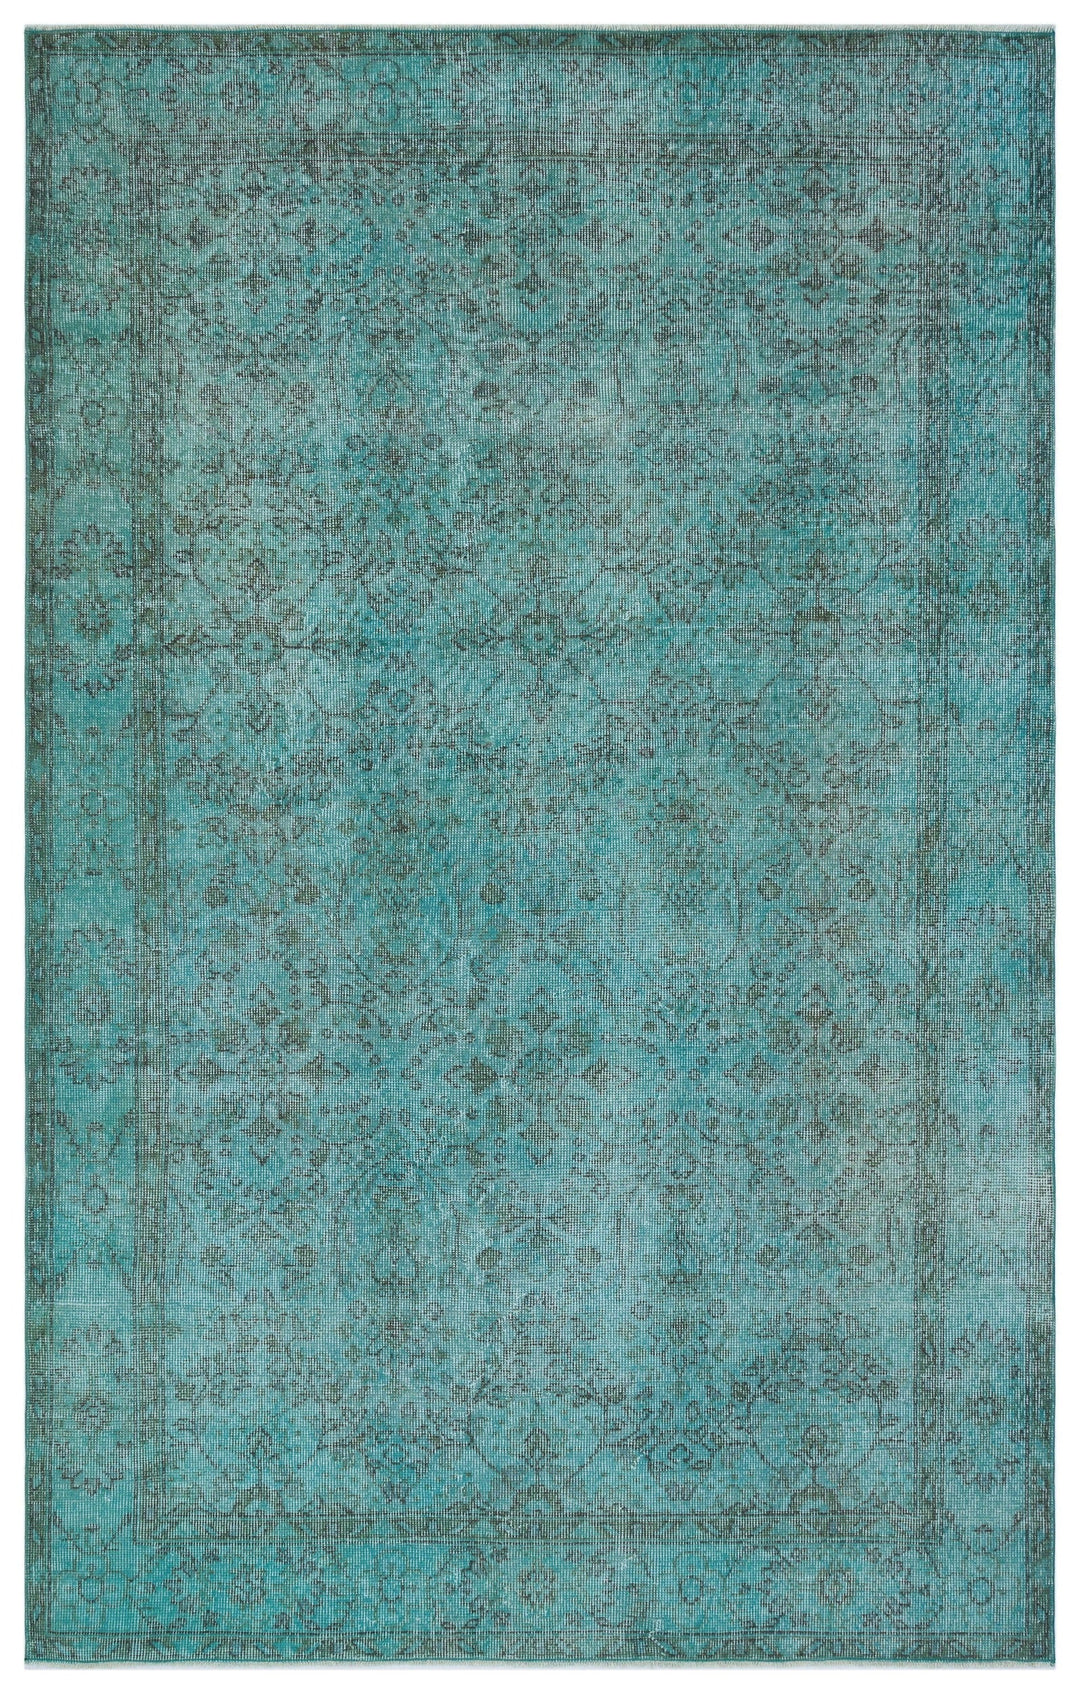 Athens Turquoise Tumbled Wool Hand Woven Rug 172 x 275